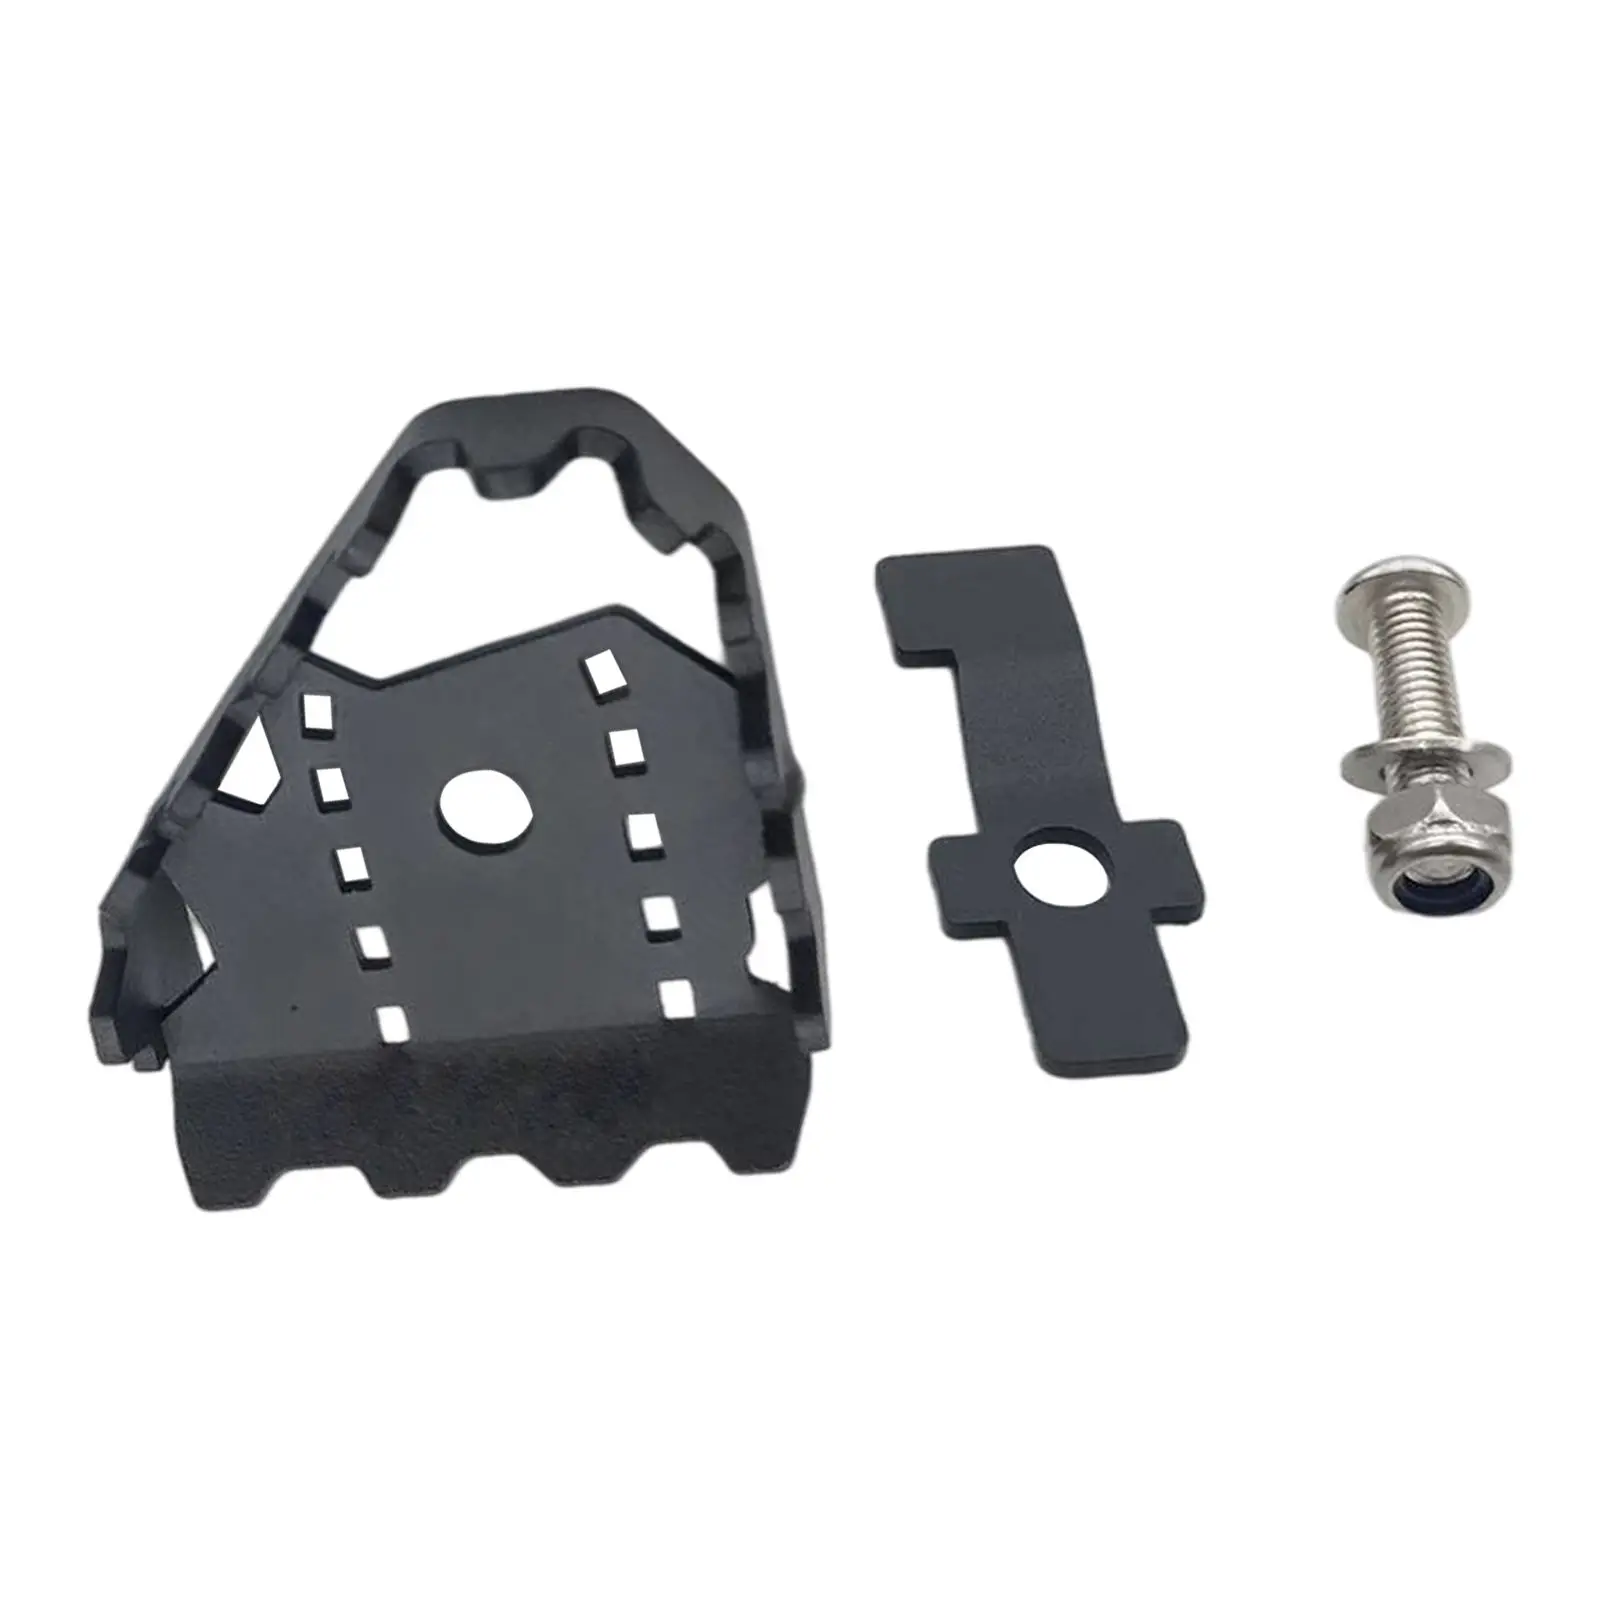 Brake Pedal Extension Step Tip Plate Good Replacement for YAMAHA TENERE700 XTZ700 2019-2021, Accessories Interchange